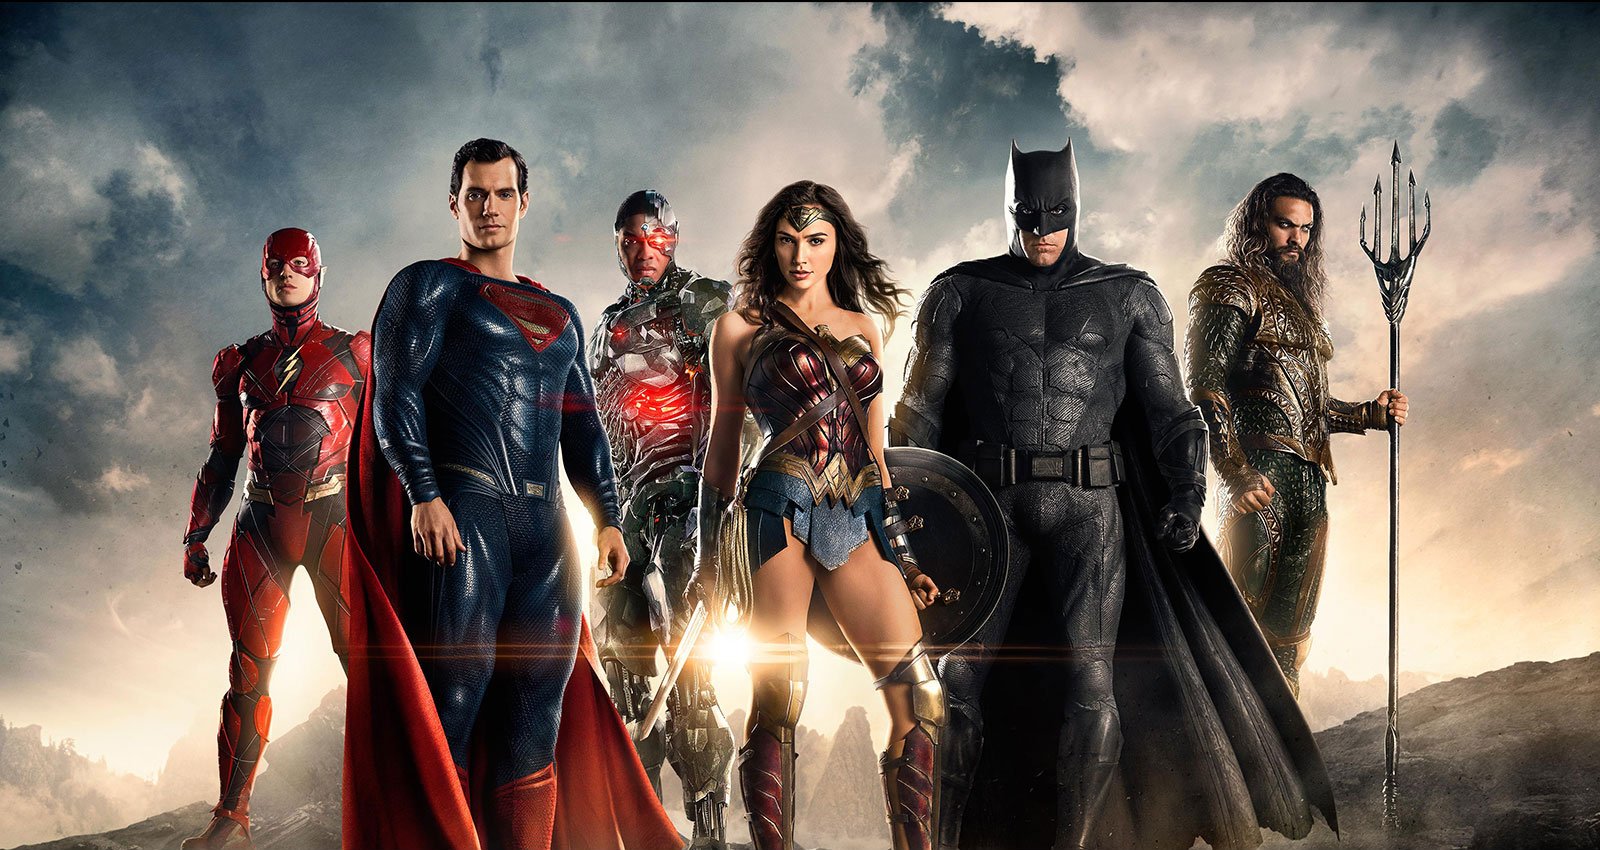 Justice League | Film review for the bombastic new superhero fantasy JUSTICE LEAGUE, opening in theatres November 17th, 2017.